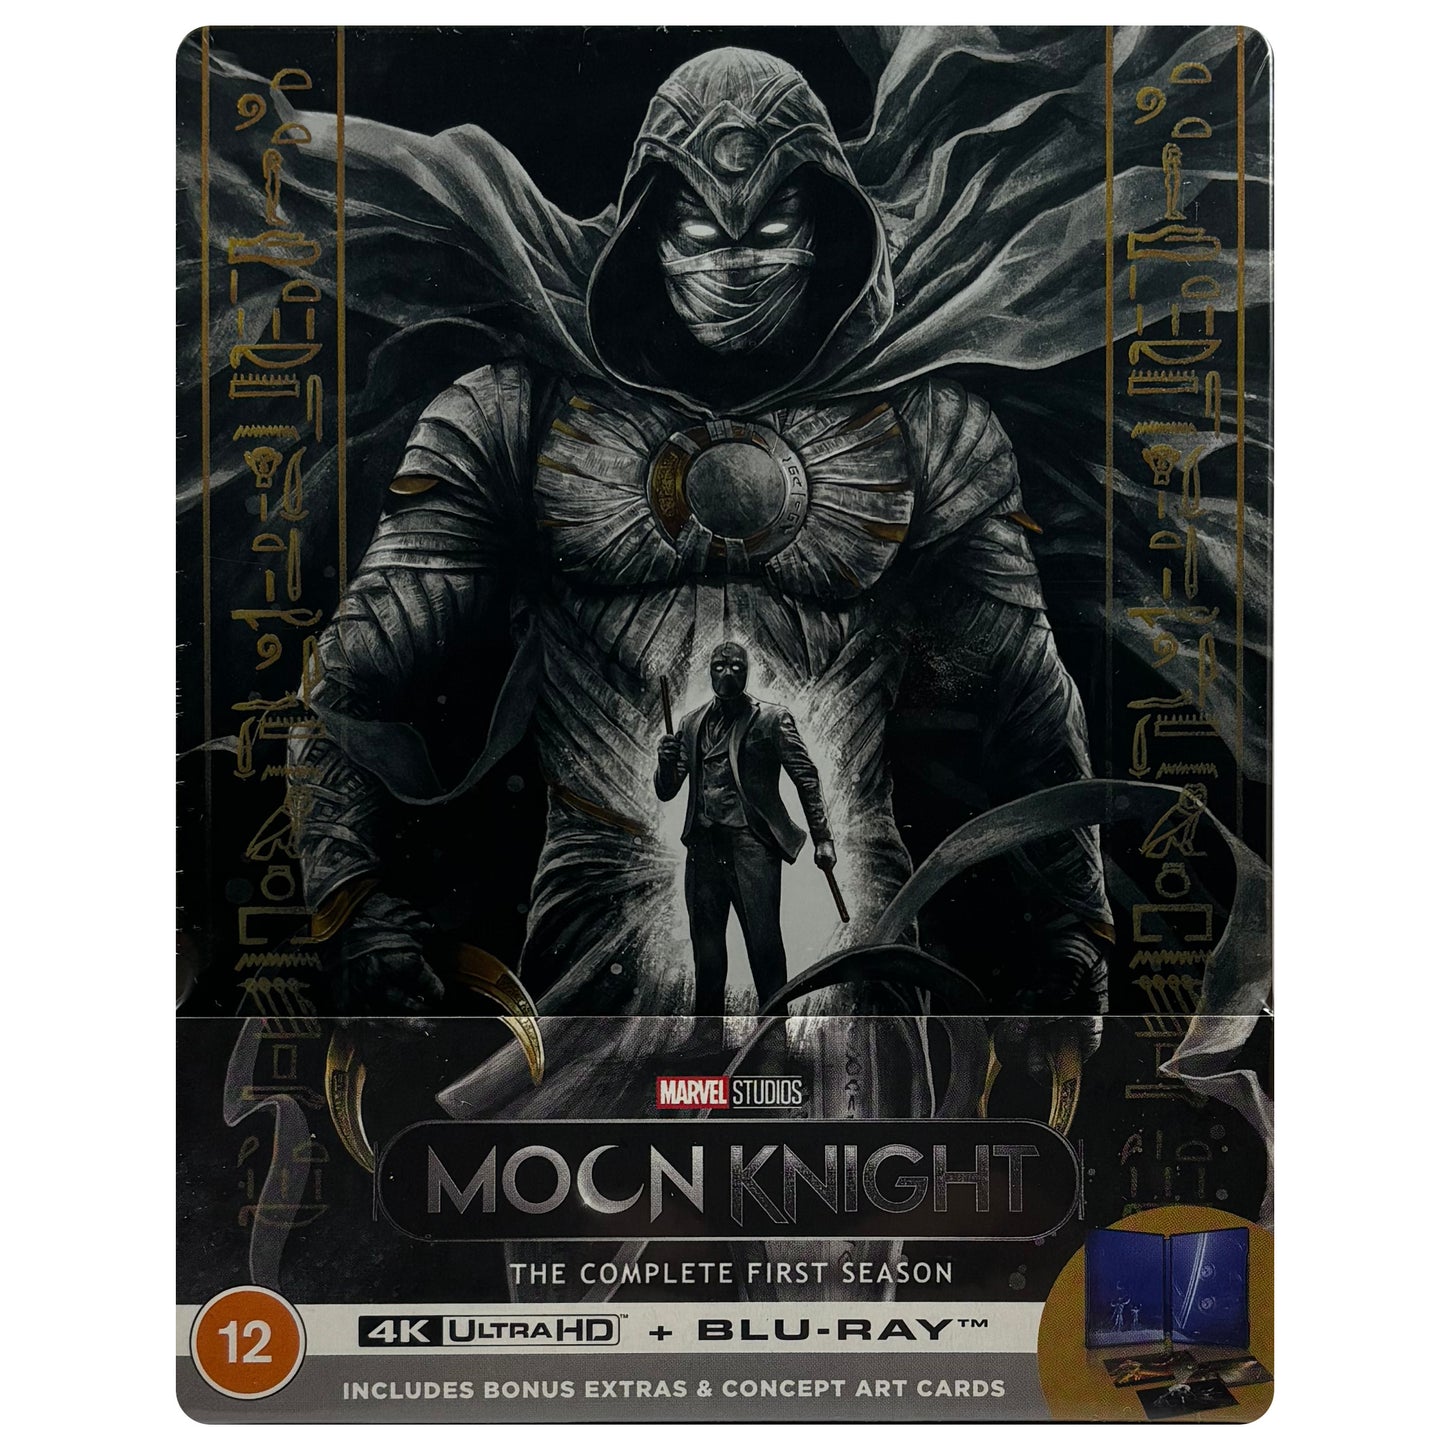 Moon Knight Complete First Season 4K + Blu-Ray Steelbook - Collector's Edition